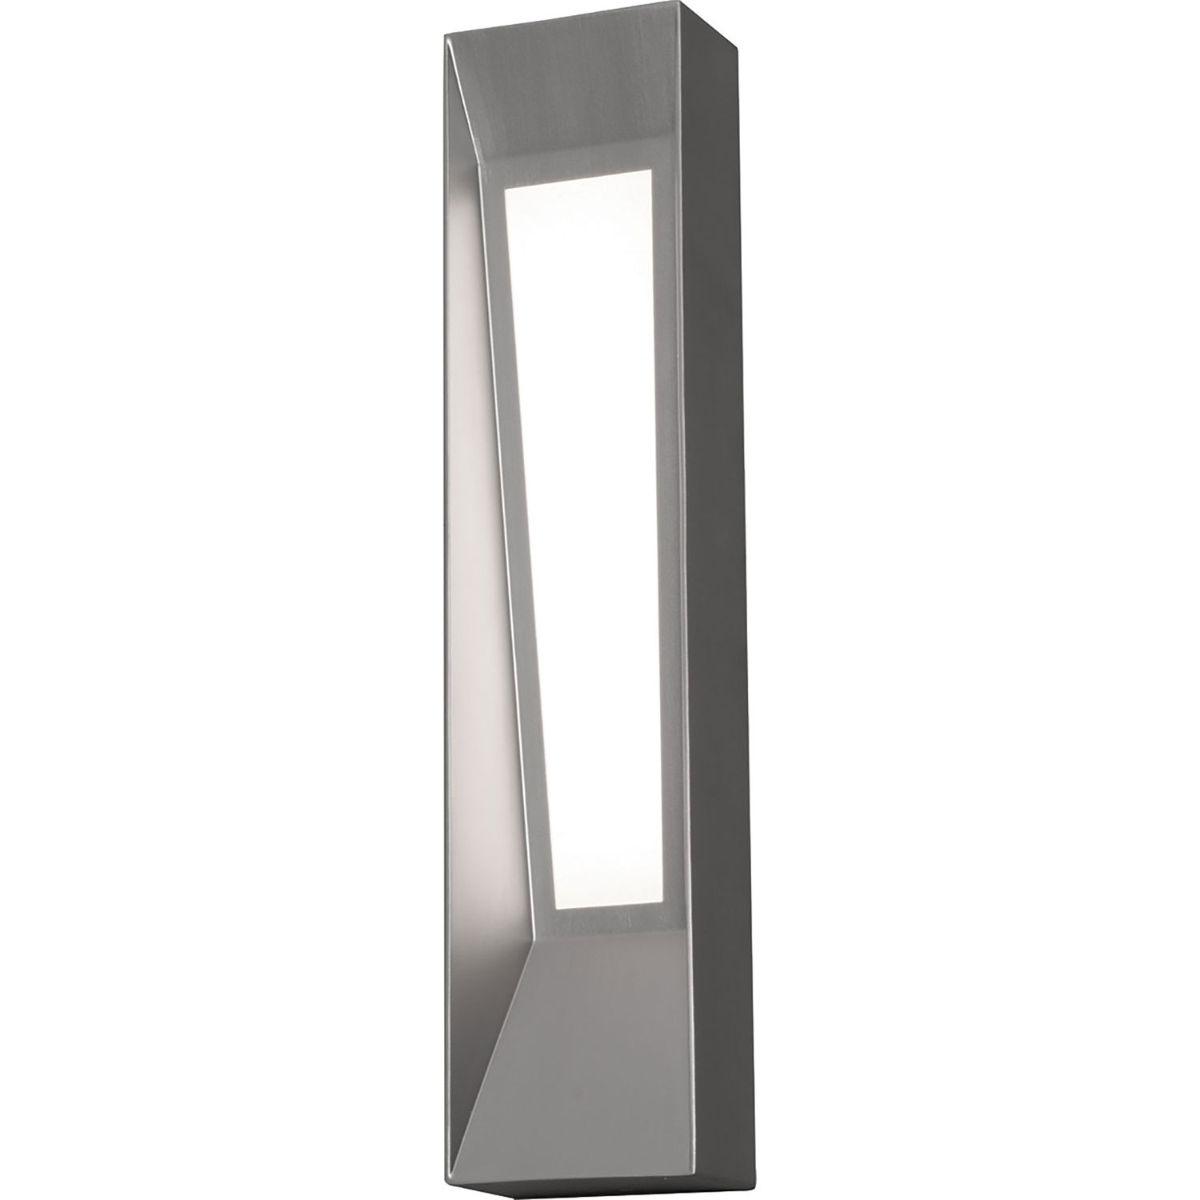 Rowan 18 in. LED Outdoor Wall Sconce